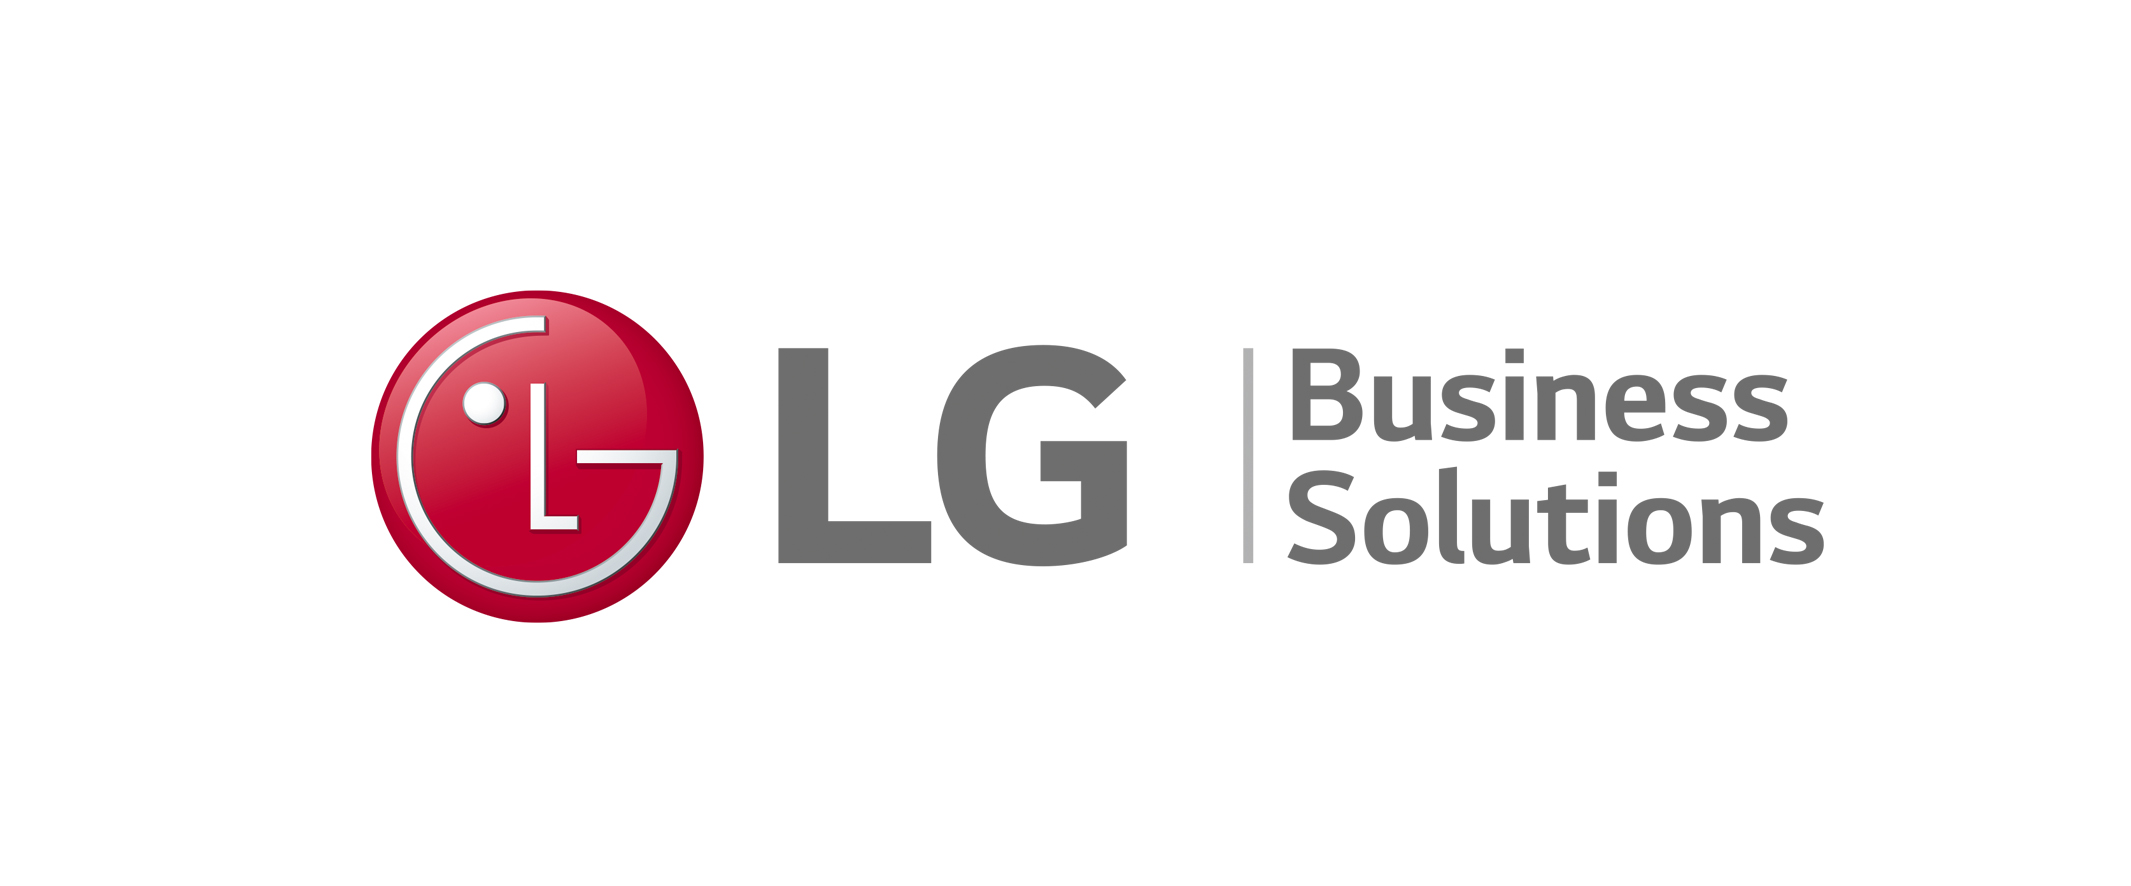 LOGO LG BUSINESS SOLUTIONS